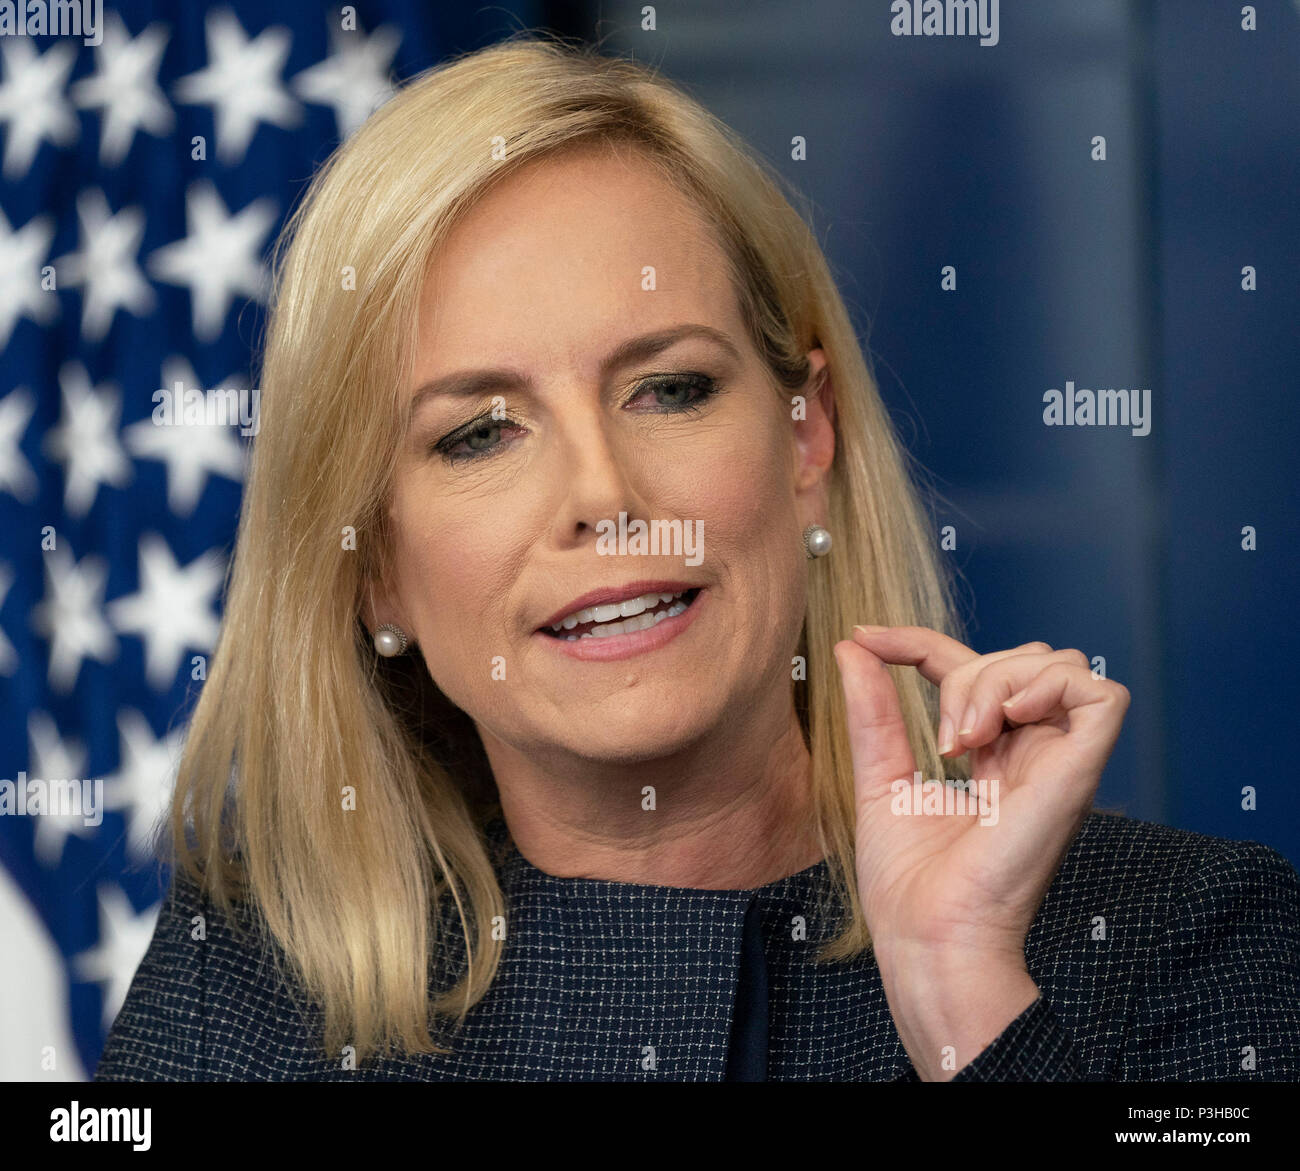 Washington, United States Of America. 18th June, 2018. United States Secretary of Homeland Security Kirstjen Nielsen holds a news briefing at the White House in Washington, DC, June 18, 2018. Credit: Chris Kleponis/CNP | usage worldwide Credit: dpa/Alamy Live News Stock Photo